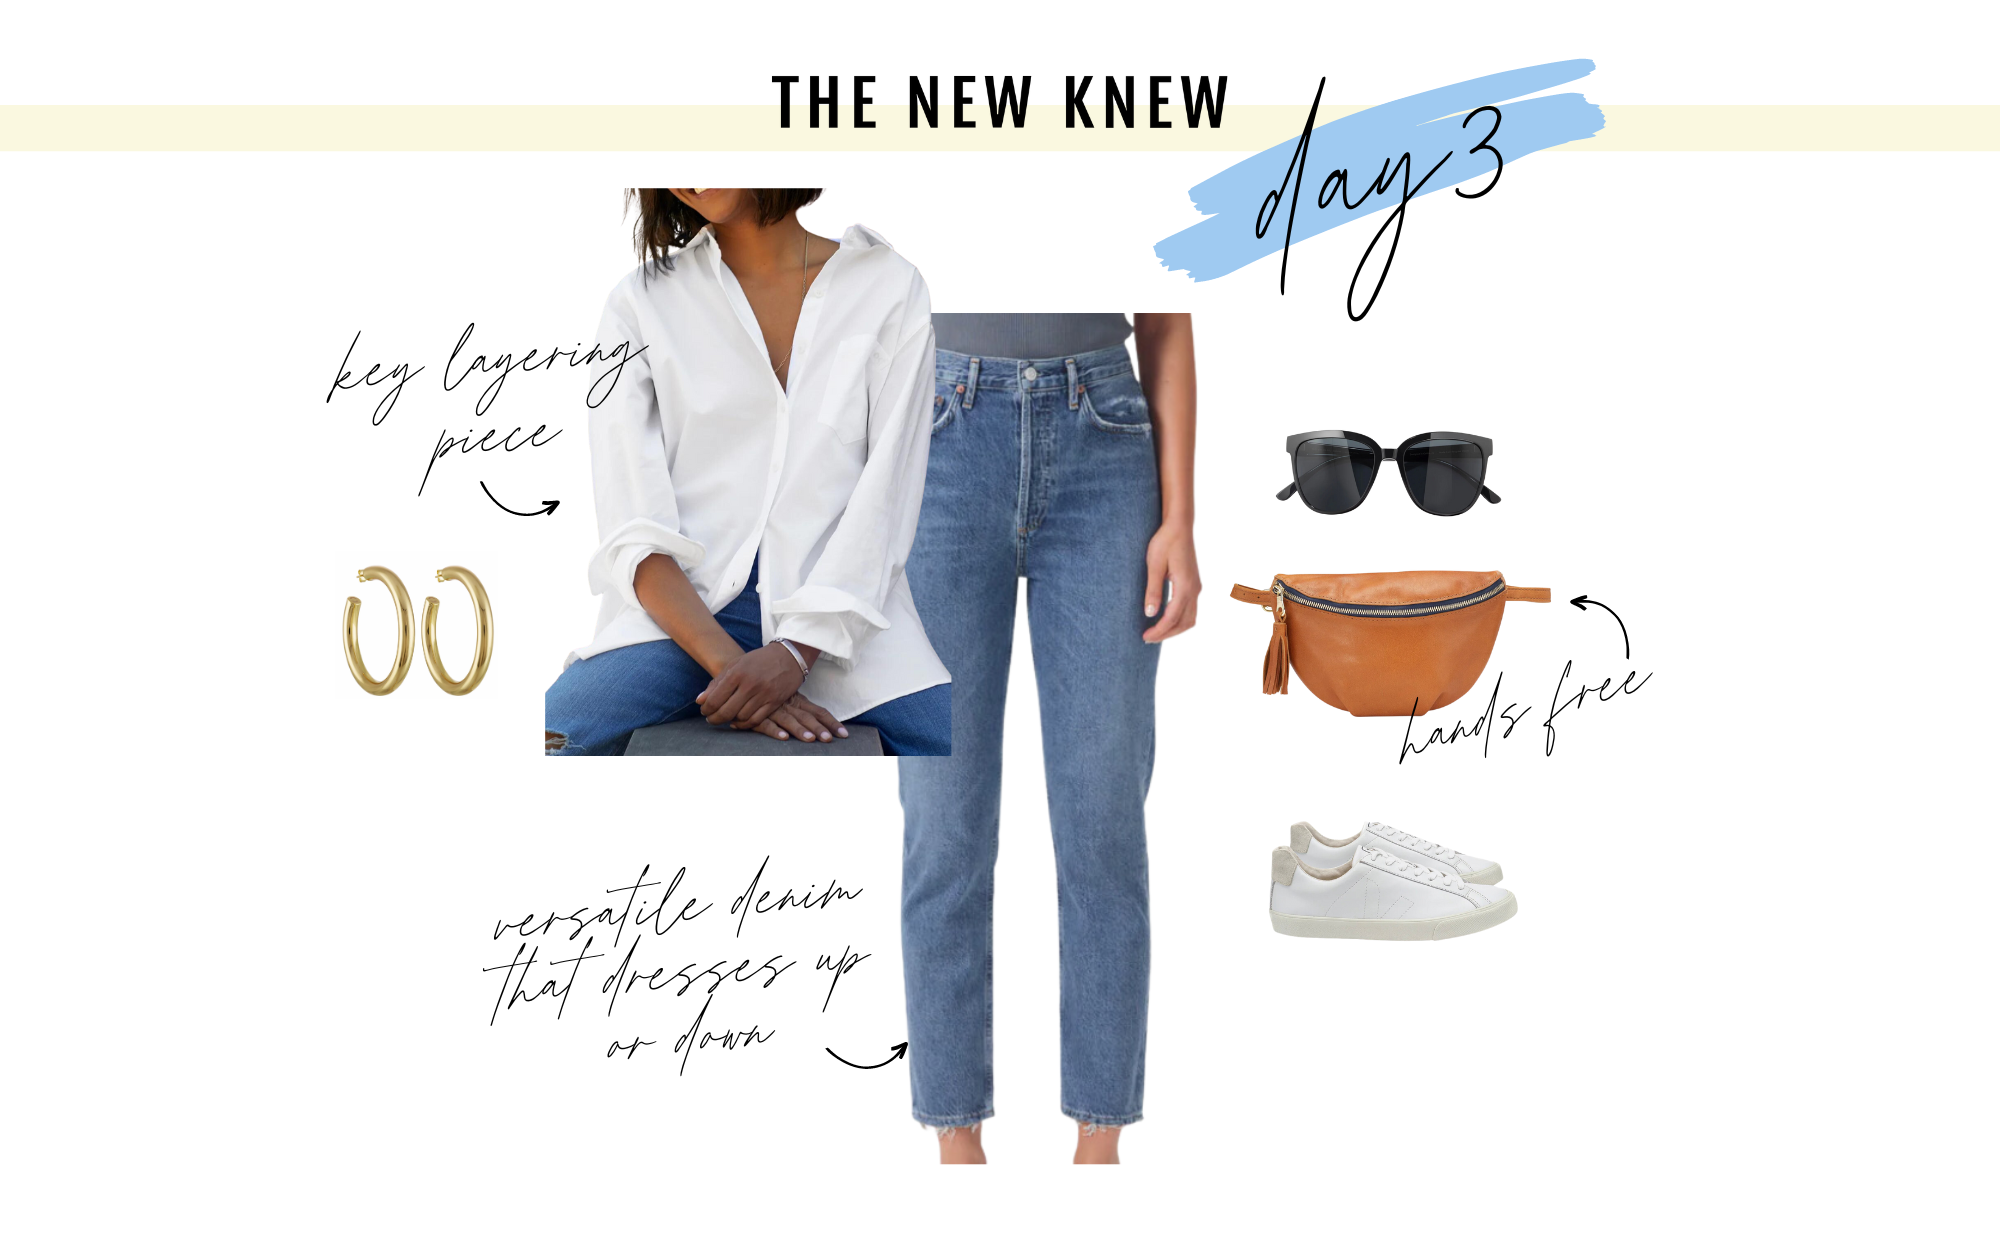 An outfit from a capsule wardrobe featuring a white button down shirt and denim jeans.